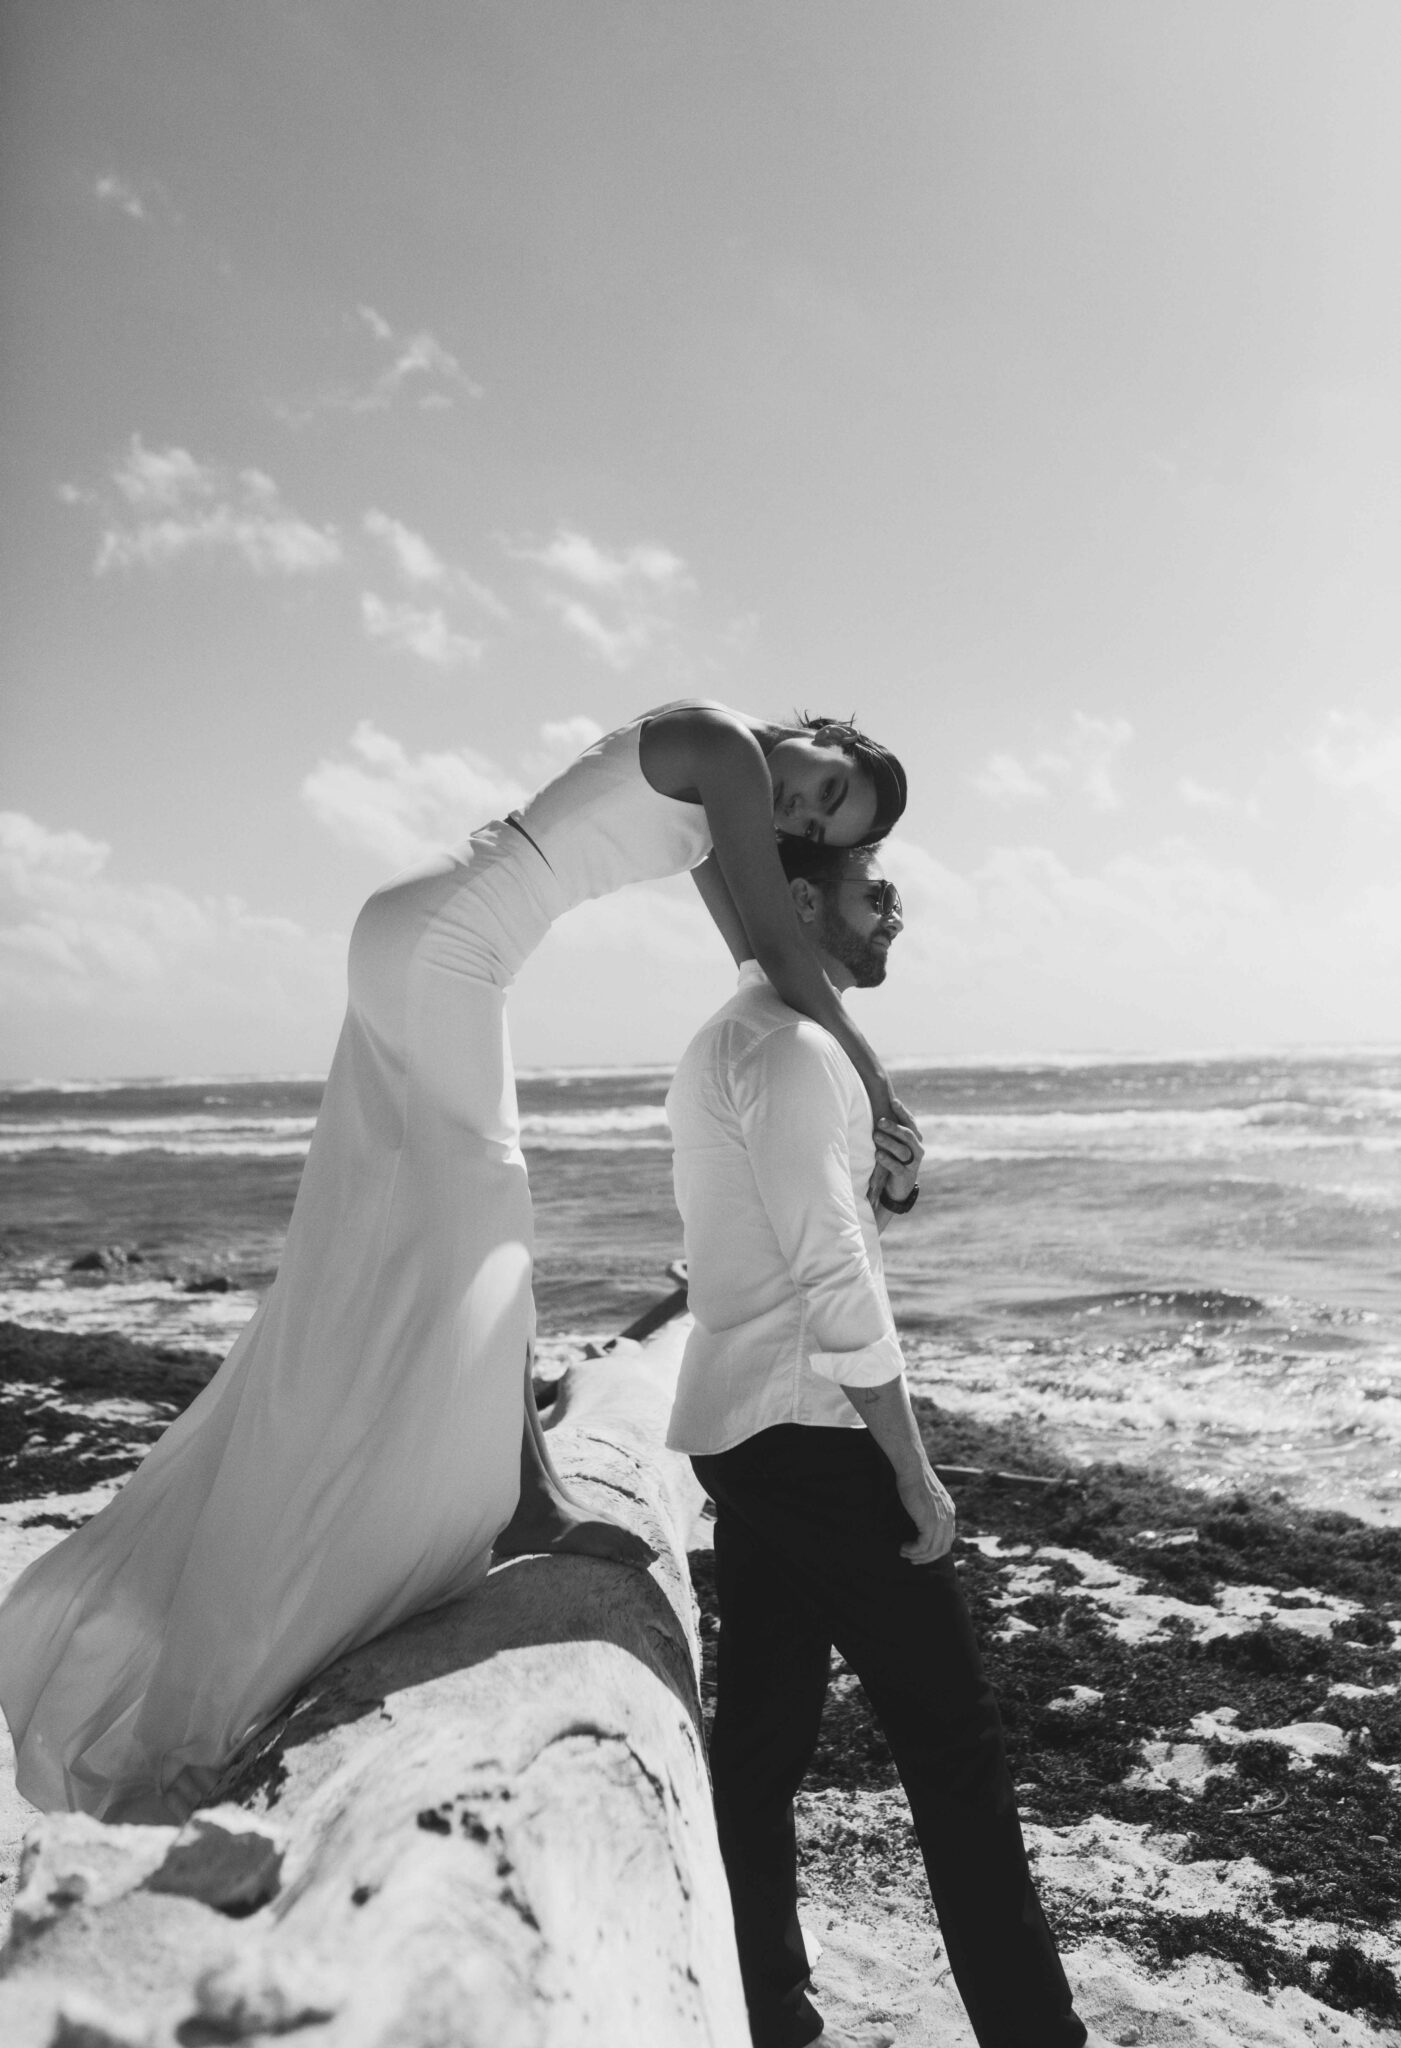 Seaside portrait of bride in elegant gown leaning over groom, as he gazes out onto the ocean, black and white portrait inspiration. 